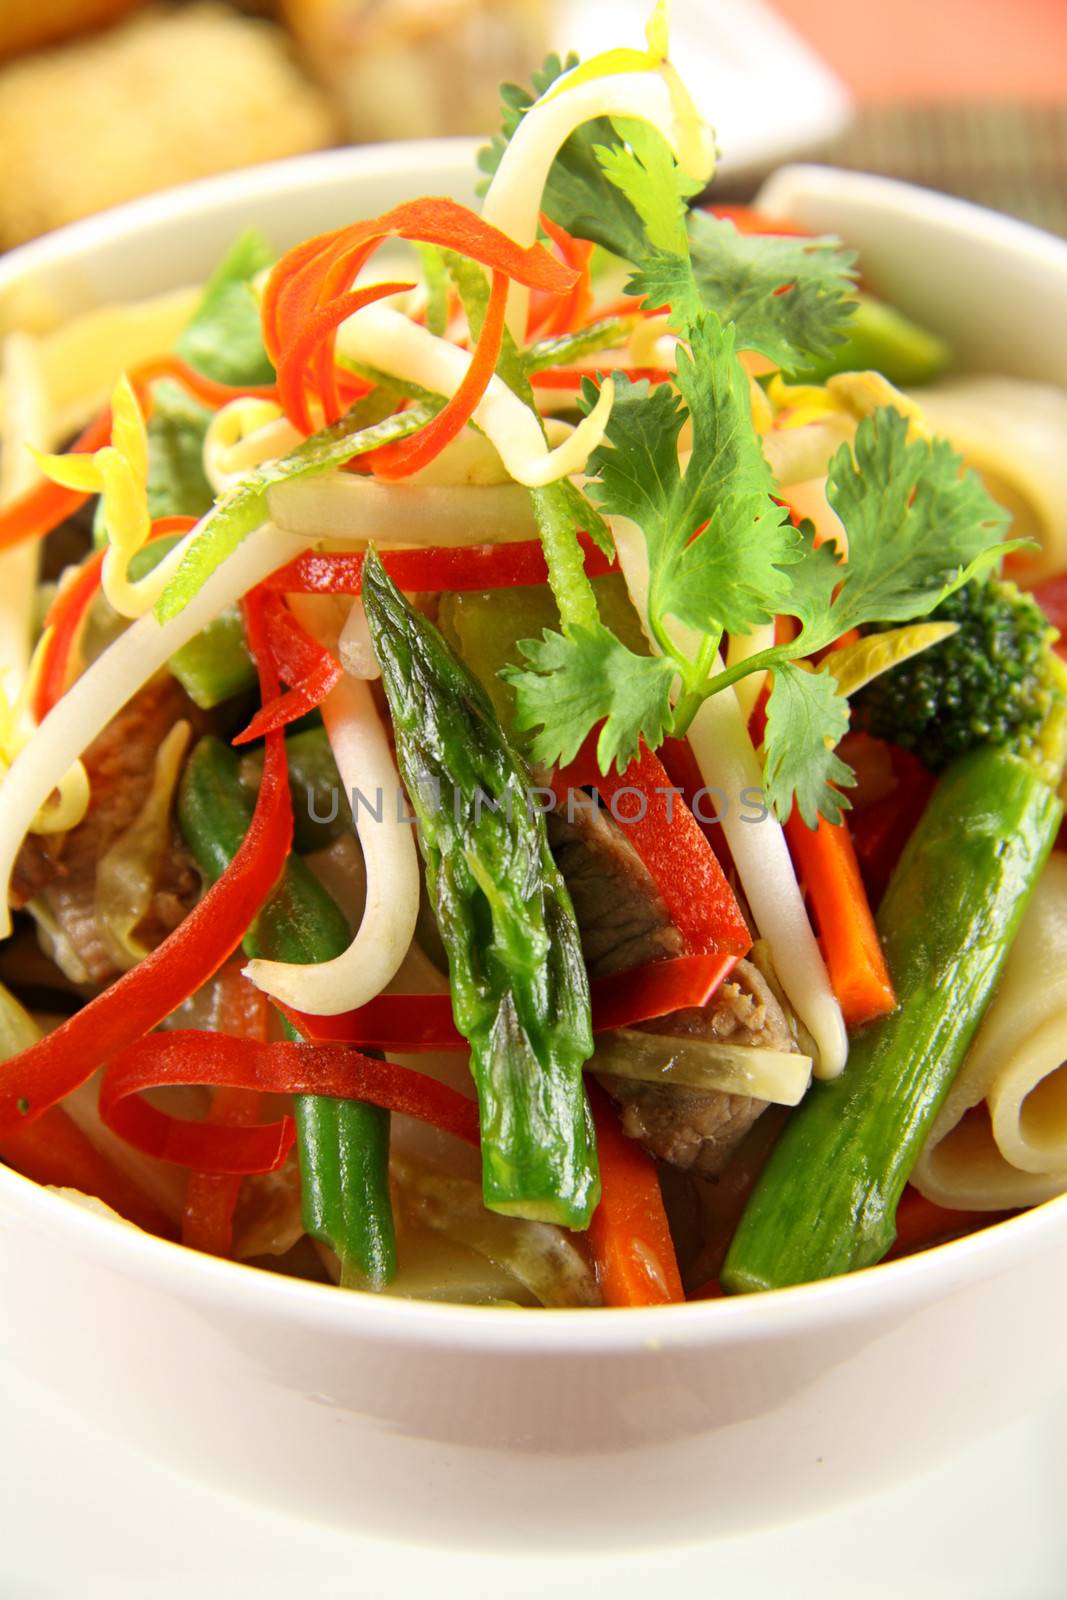 Freshly prepared beef noodle stirfry with dimsums ready to serve.